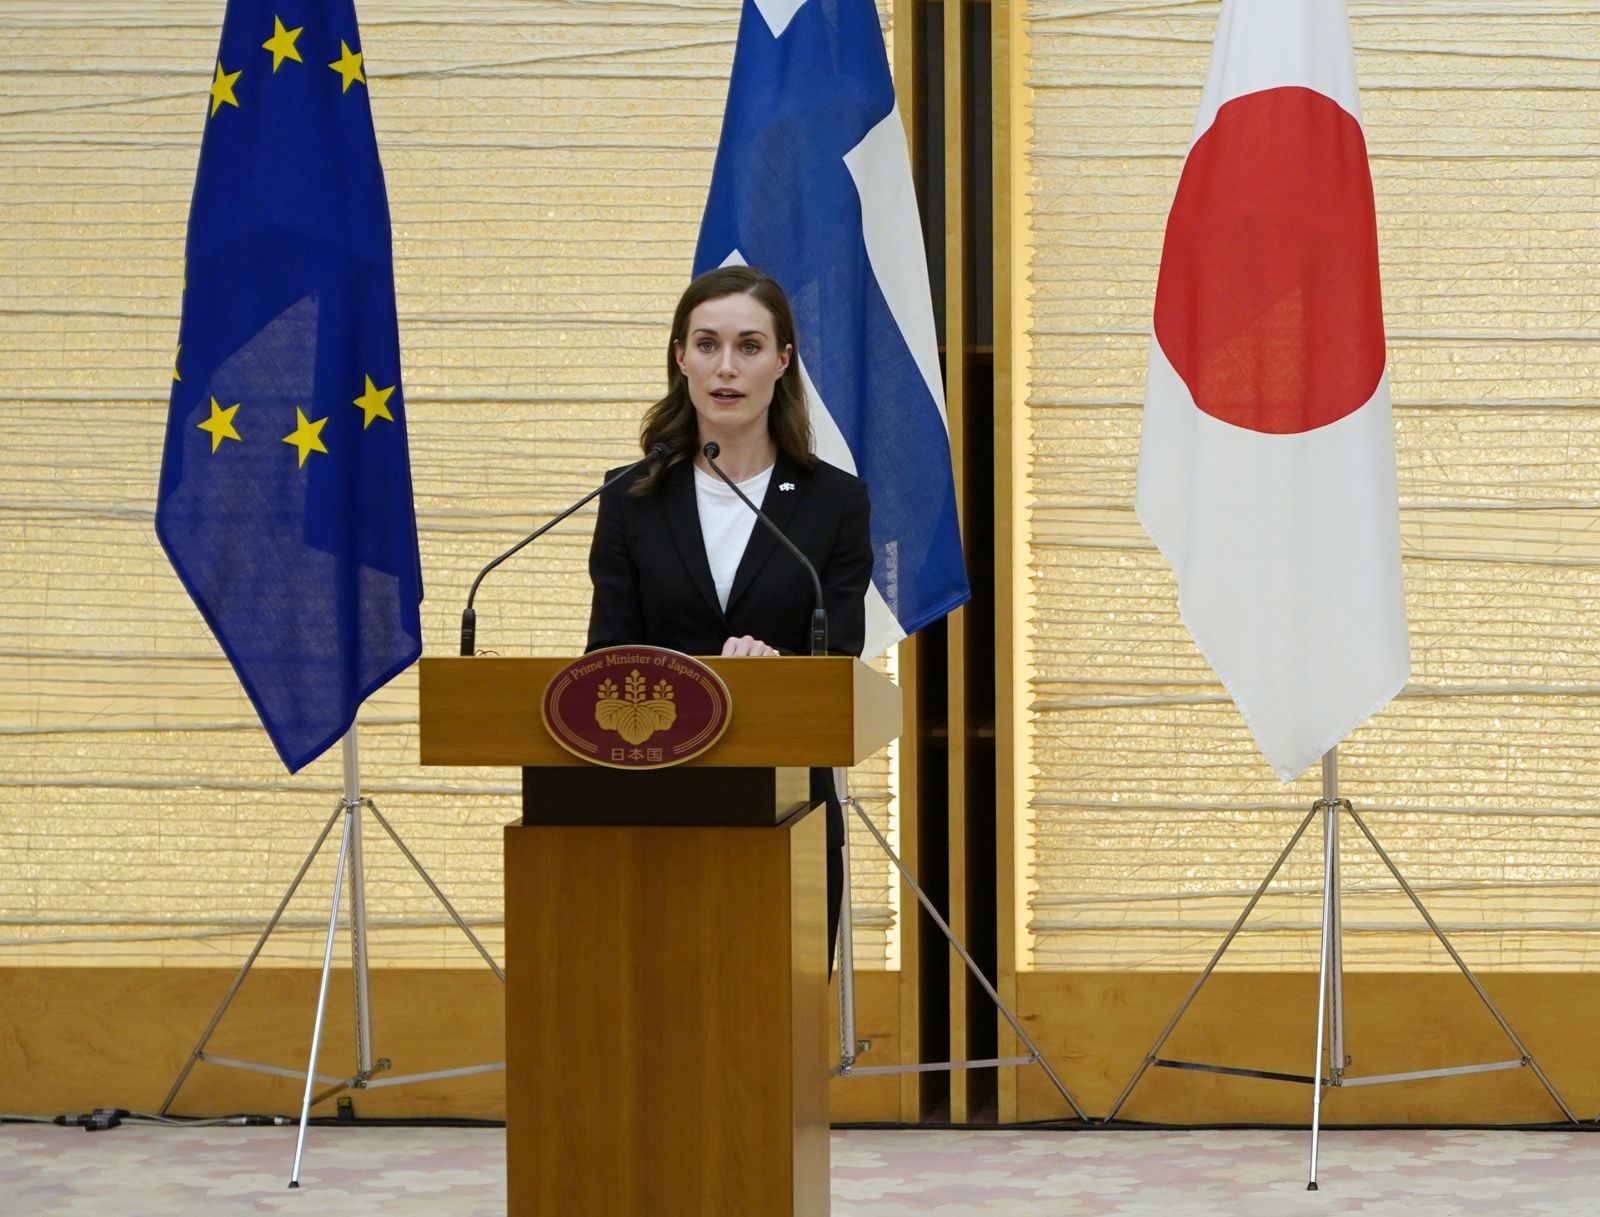 epa09939759 Finland's Prime Minister Sanna Marin (L) speaks next to Japan’s Prime Minister Fumio Kishida during a joint press announcement at the latter’s official residence in Tokyo, Japan, 11 May 2022. Finnish Prime Minister Marin and her Japanese counterpart strongly condemned Russia's invasion in Ukraine.  EPA/FRANCK ROBICHON / POOL